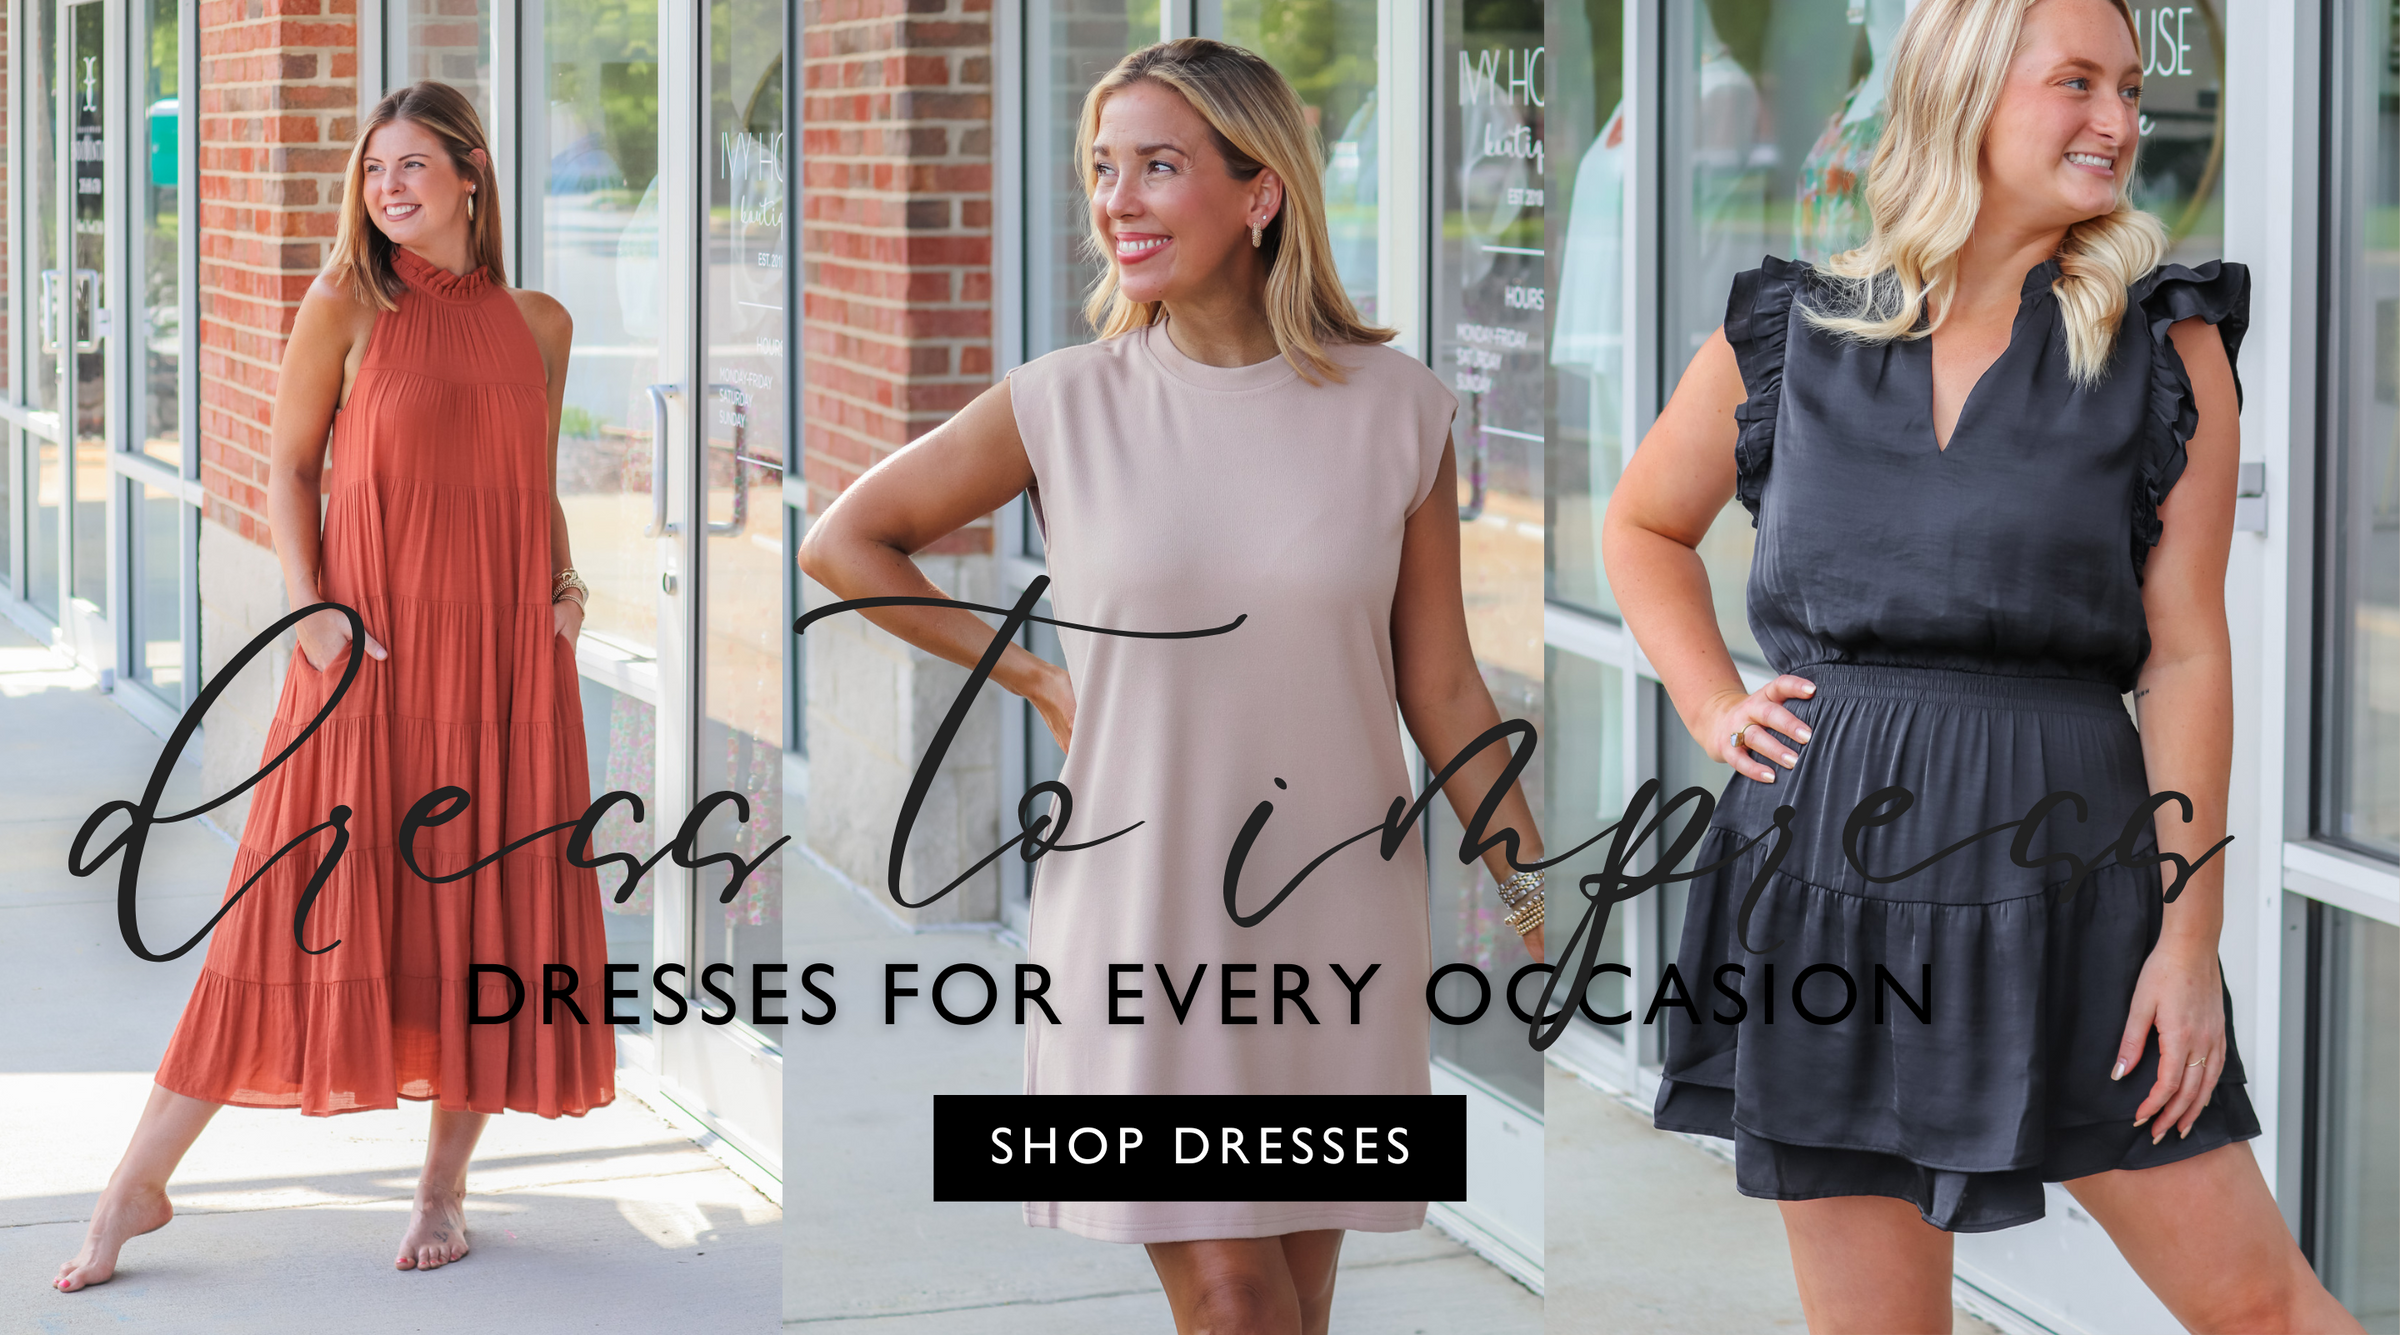 Three images that all take place outside of Ivy House Boutique with the door, windows, and brick in the background. The first image is of a brunette girl wearing a long orange dress. The second image is of a blond girl wearing a short casual taupe dress. And the third image is a different blond girl wearing a dressier black dress. The text reads, "dress to impress. Dresses for every occasion" with a button to shop dresses.